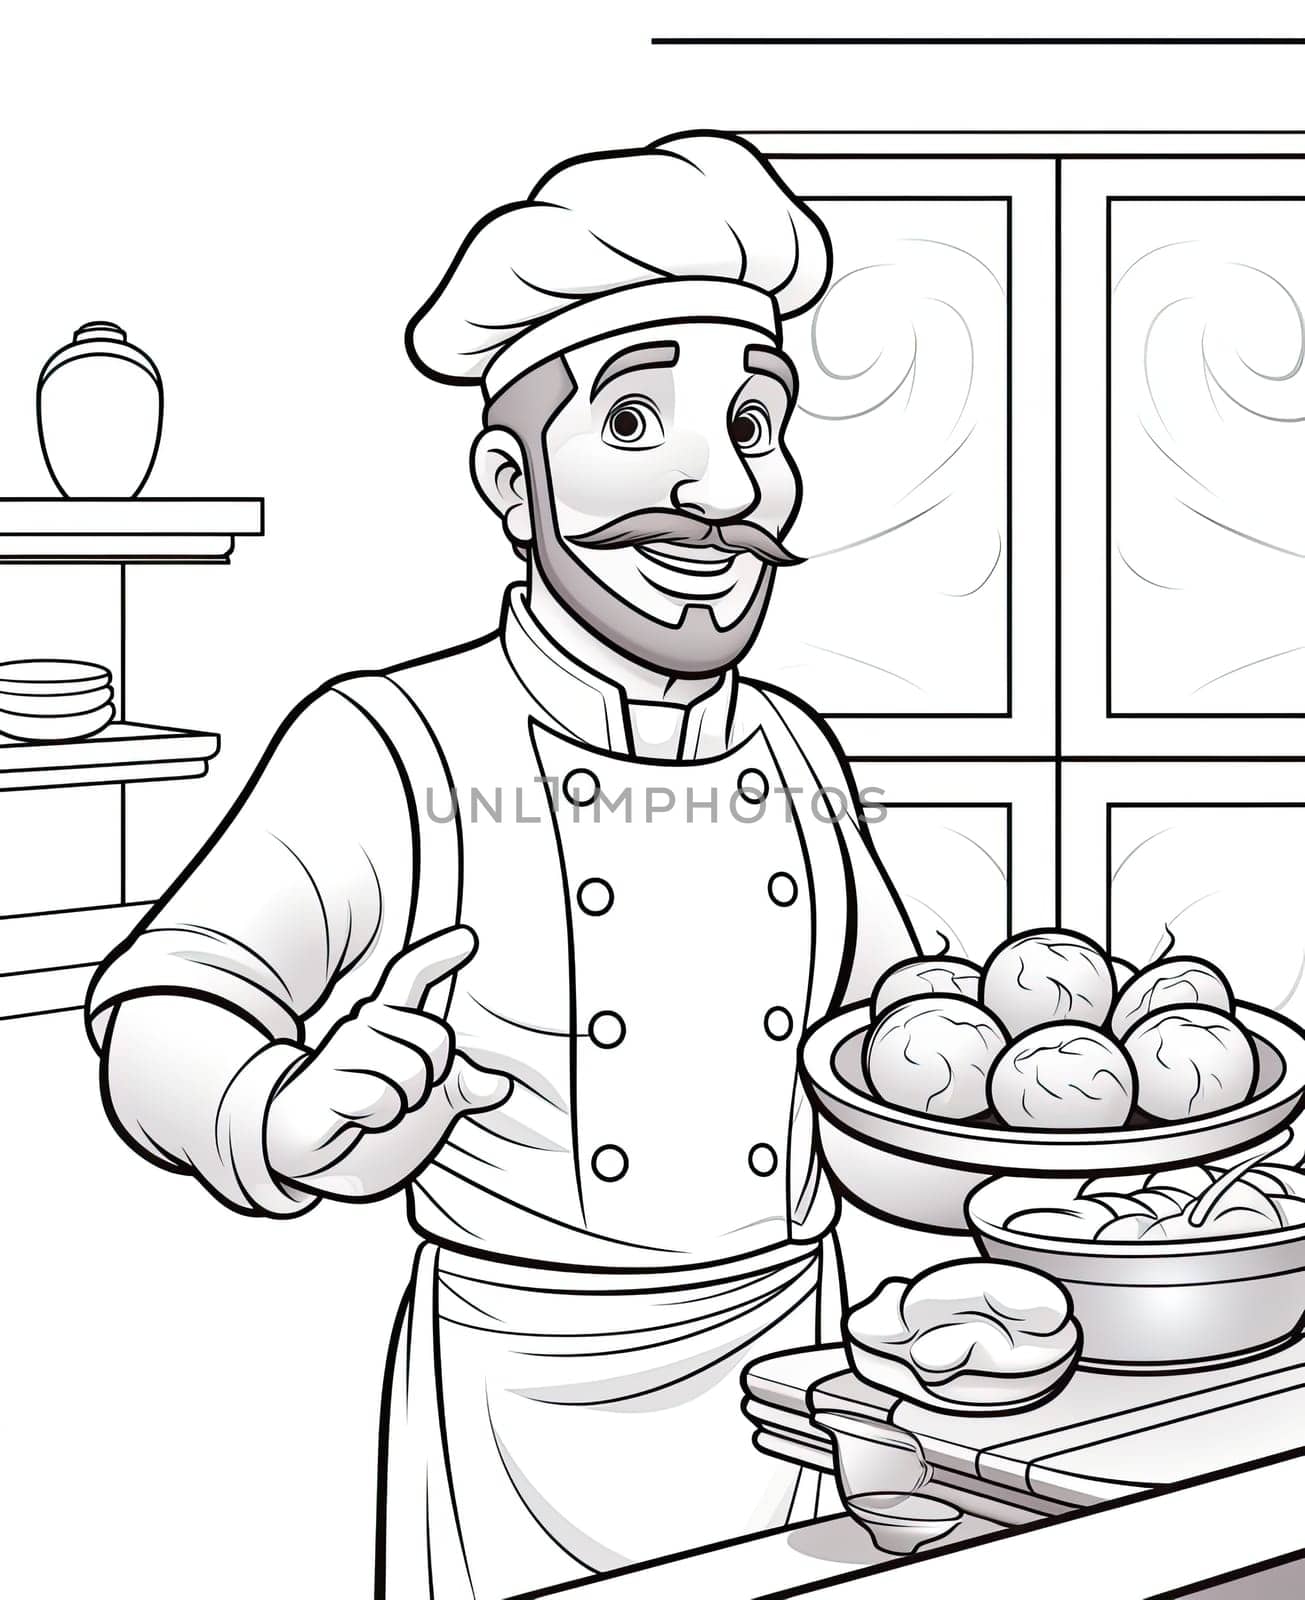 Coloring page for kids. An illustration of a chef preparing some tasty food by papatonic